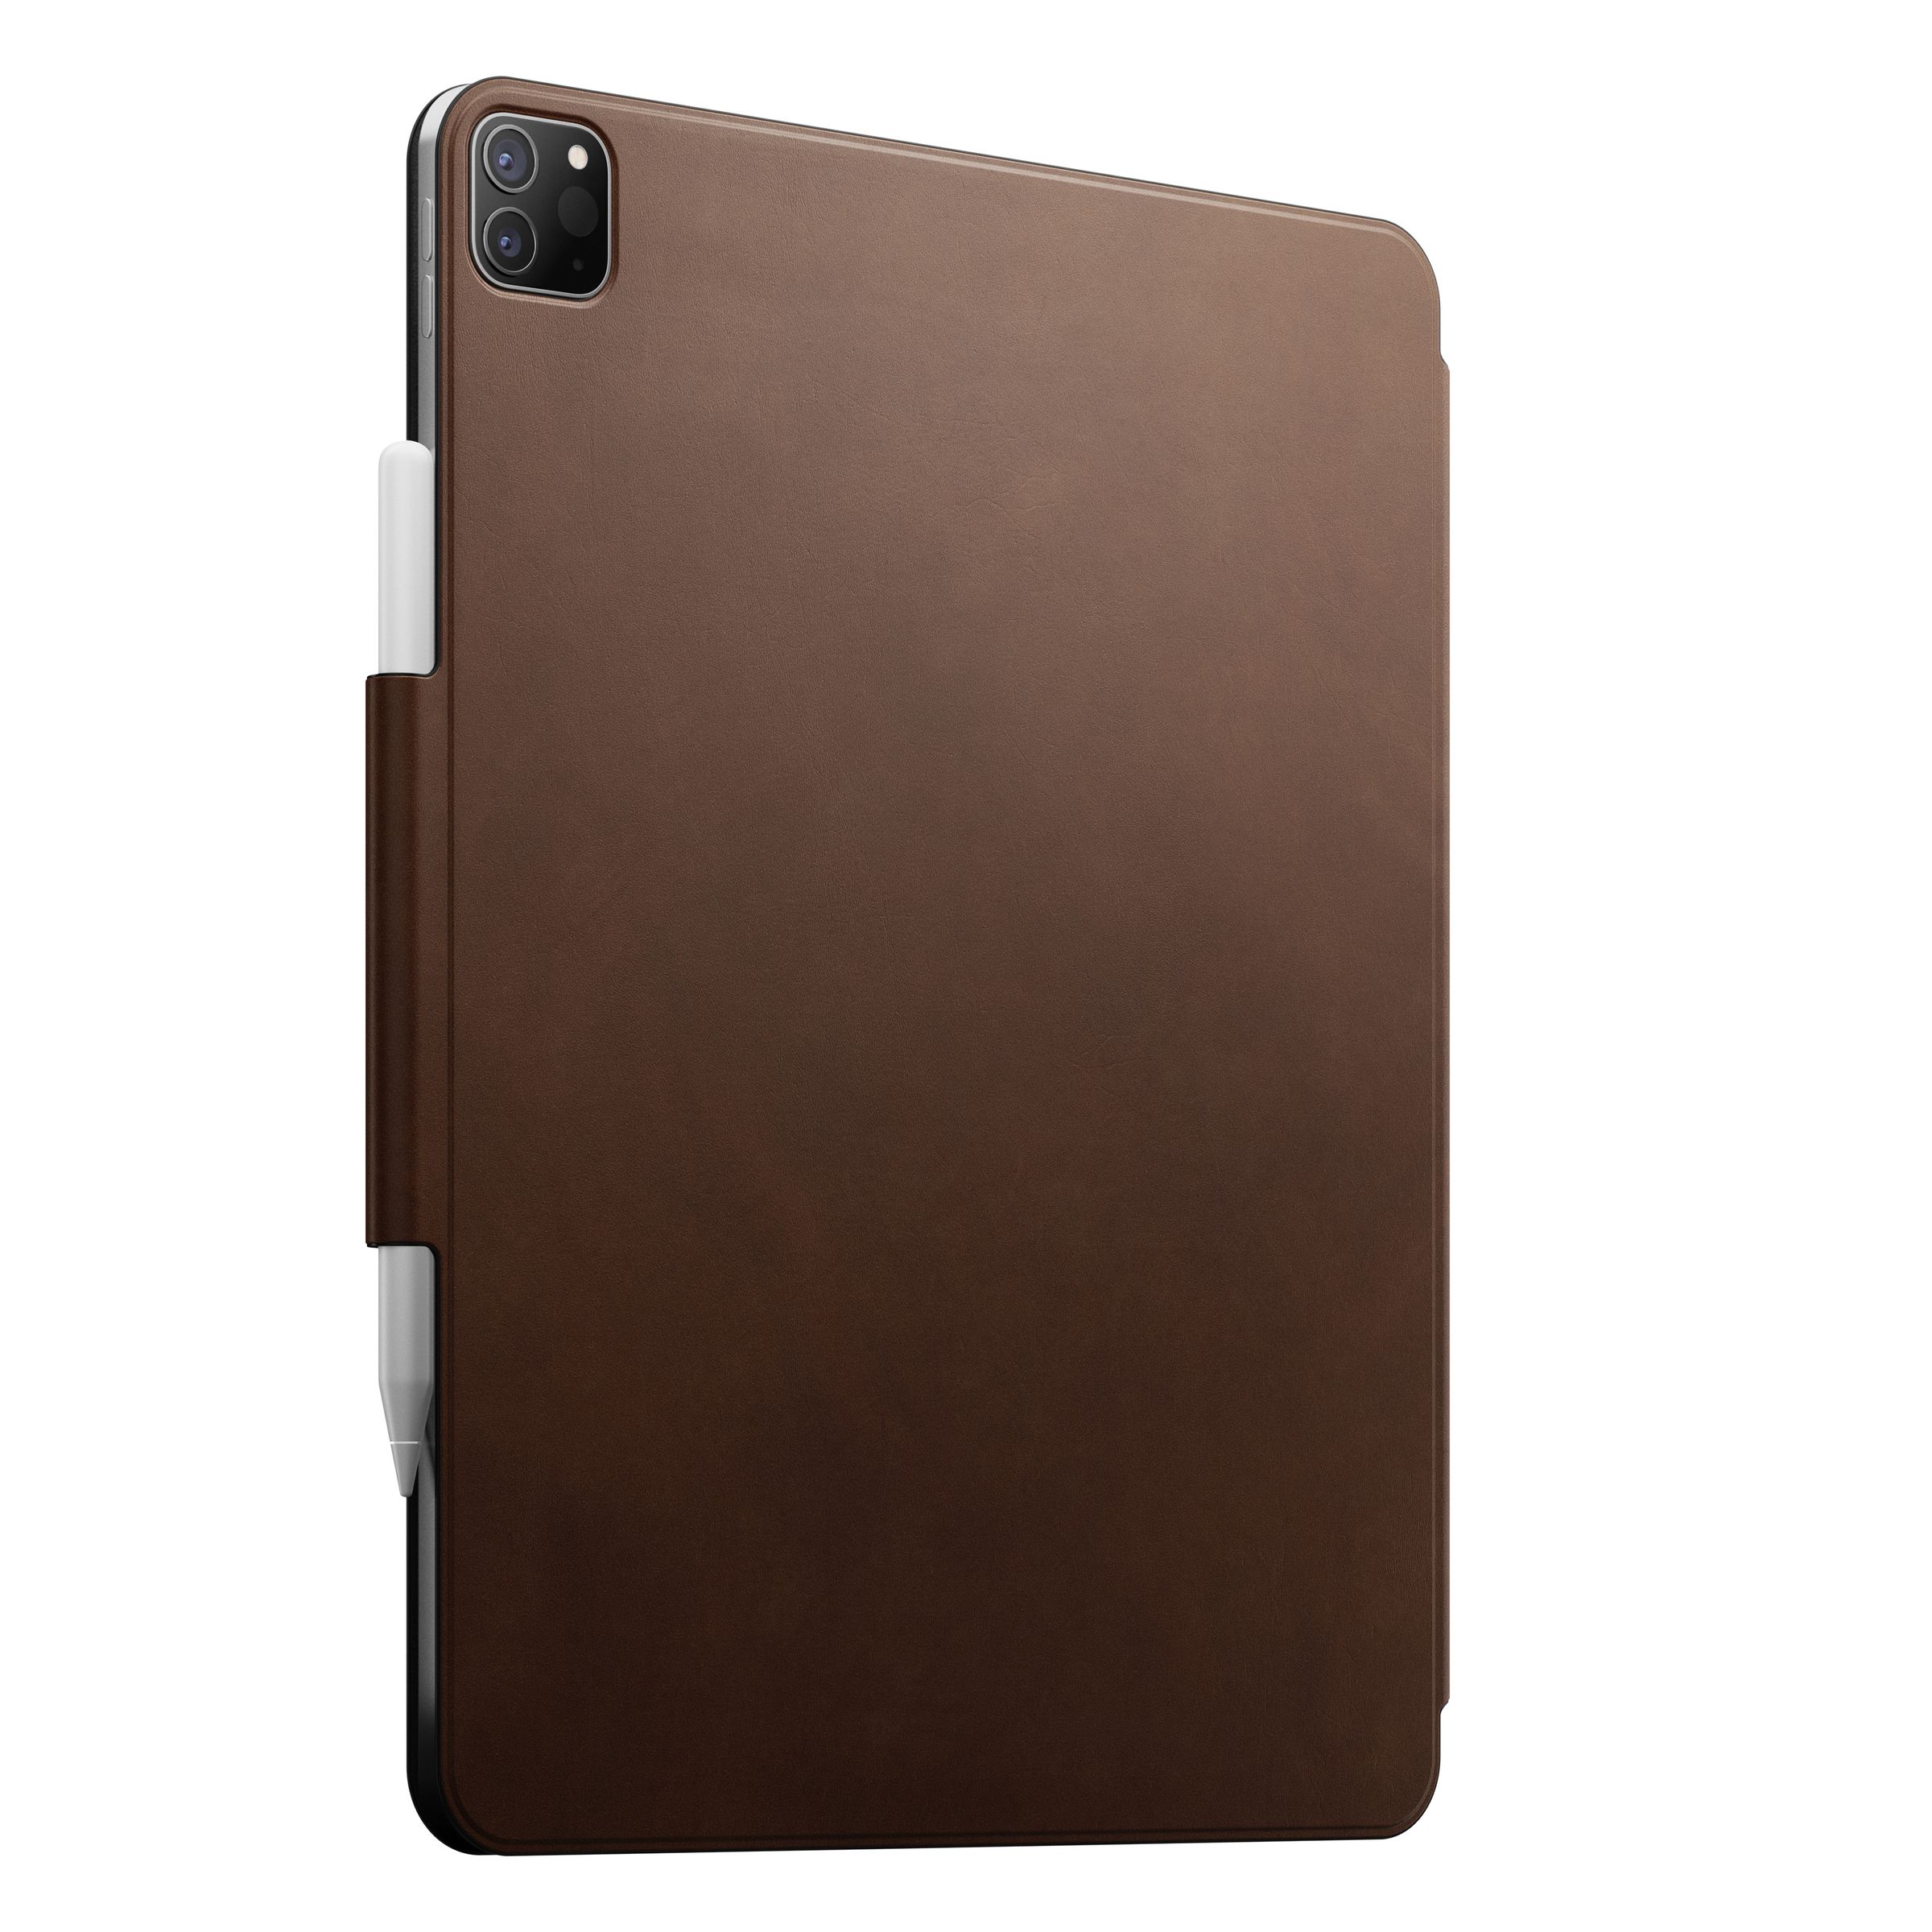 The back view of the brown Leather Folio Plus case for the iPad Pro.